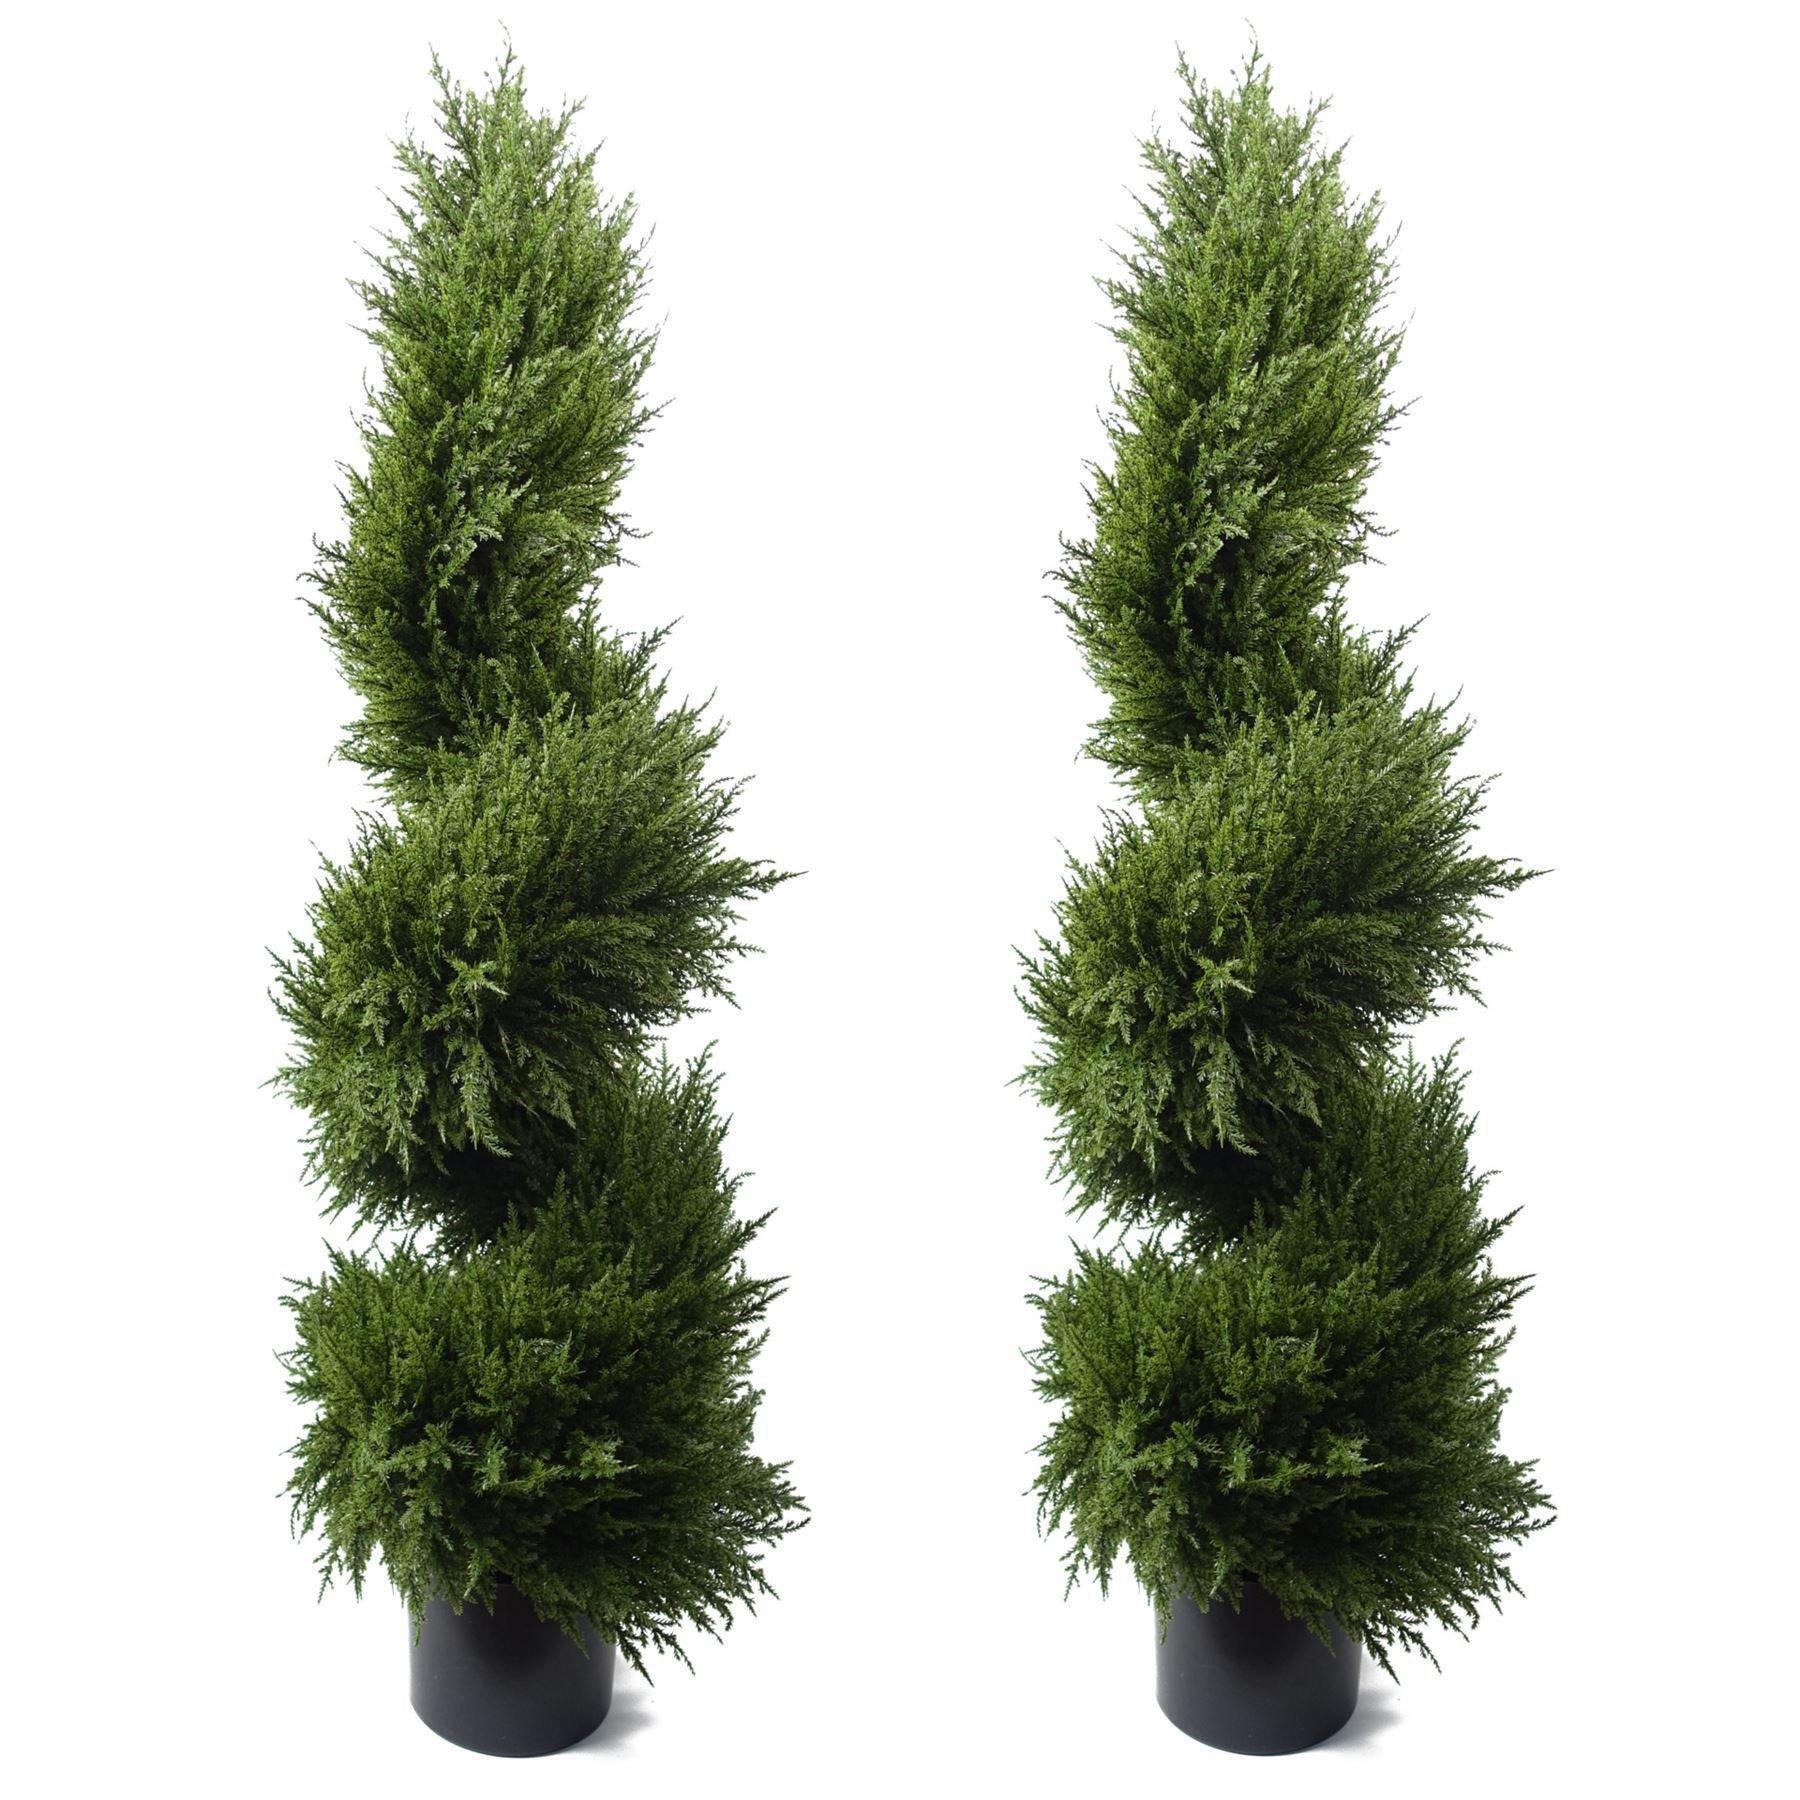 120cm Spiral Cypress Artificial Tree UV Resistant Outdoor - image 1